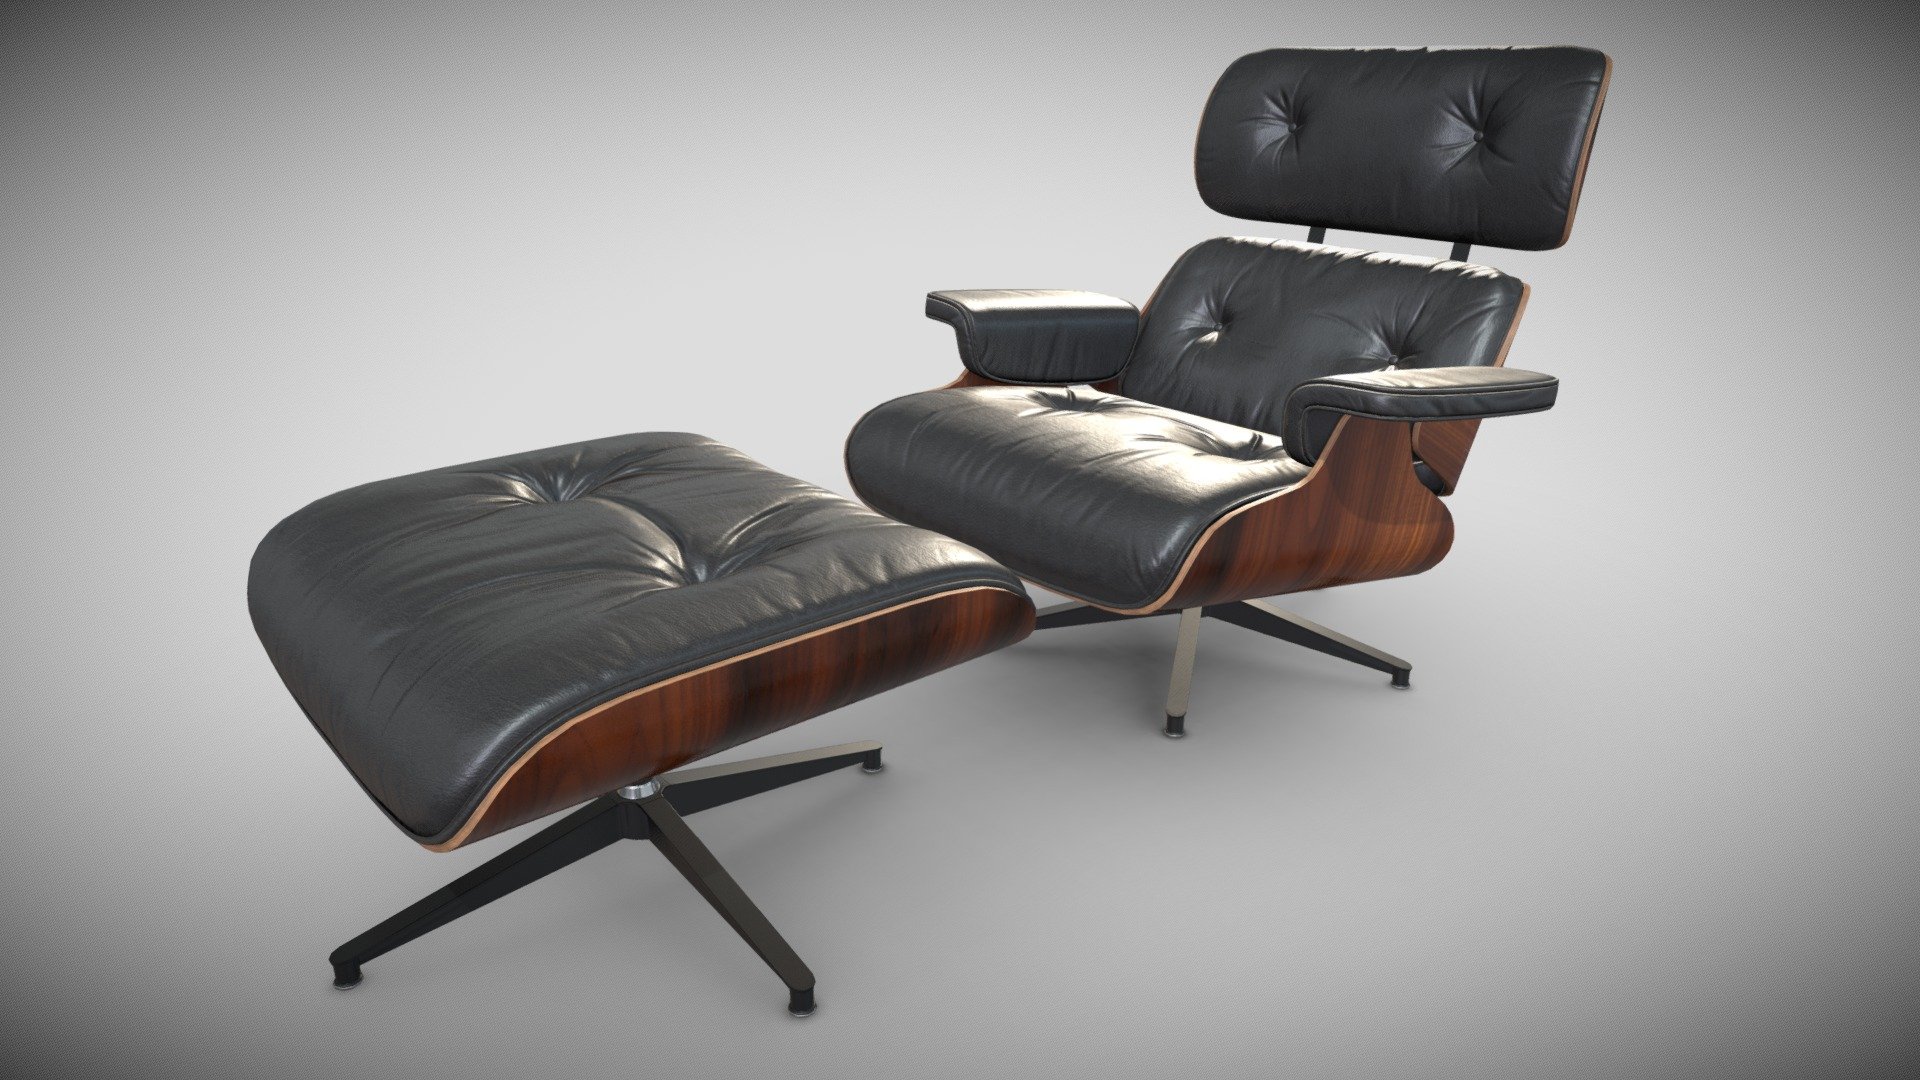 Eames Lounge Chair - 3D model by jakewhite3d [71627be] - Sketchfab